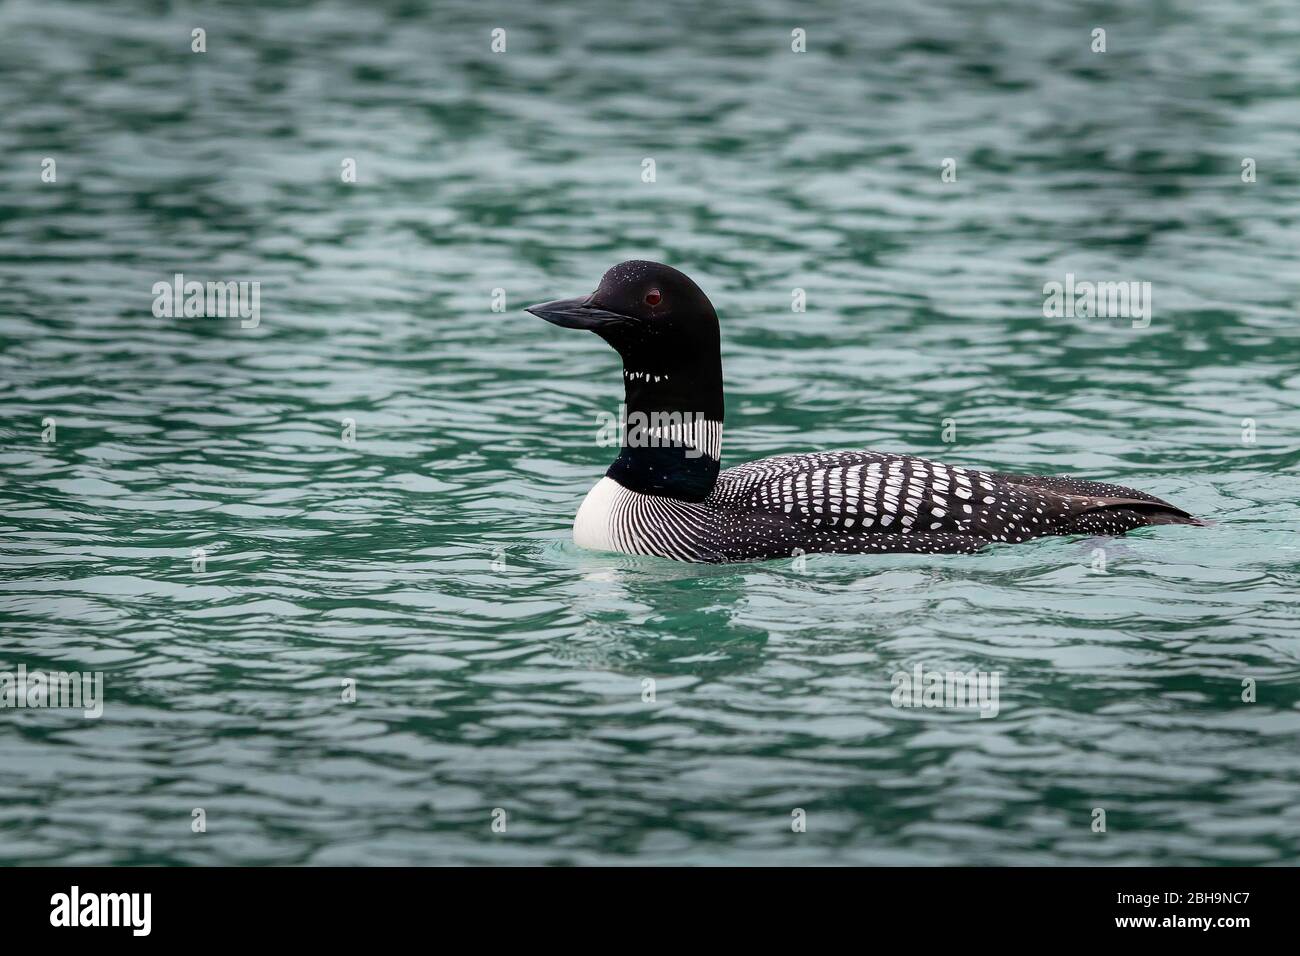 Common loon (Gavia always) swimming in Knight Inlet, British Columbia, Canada Stock Photo